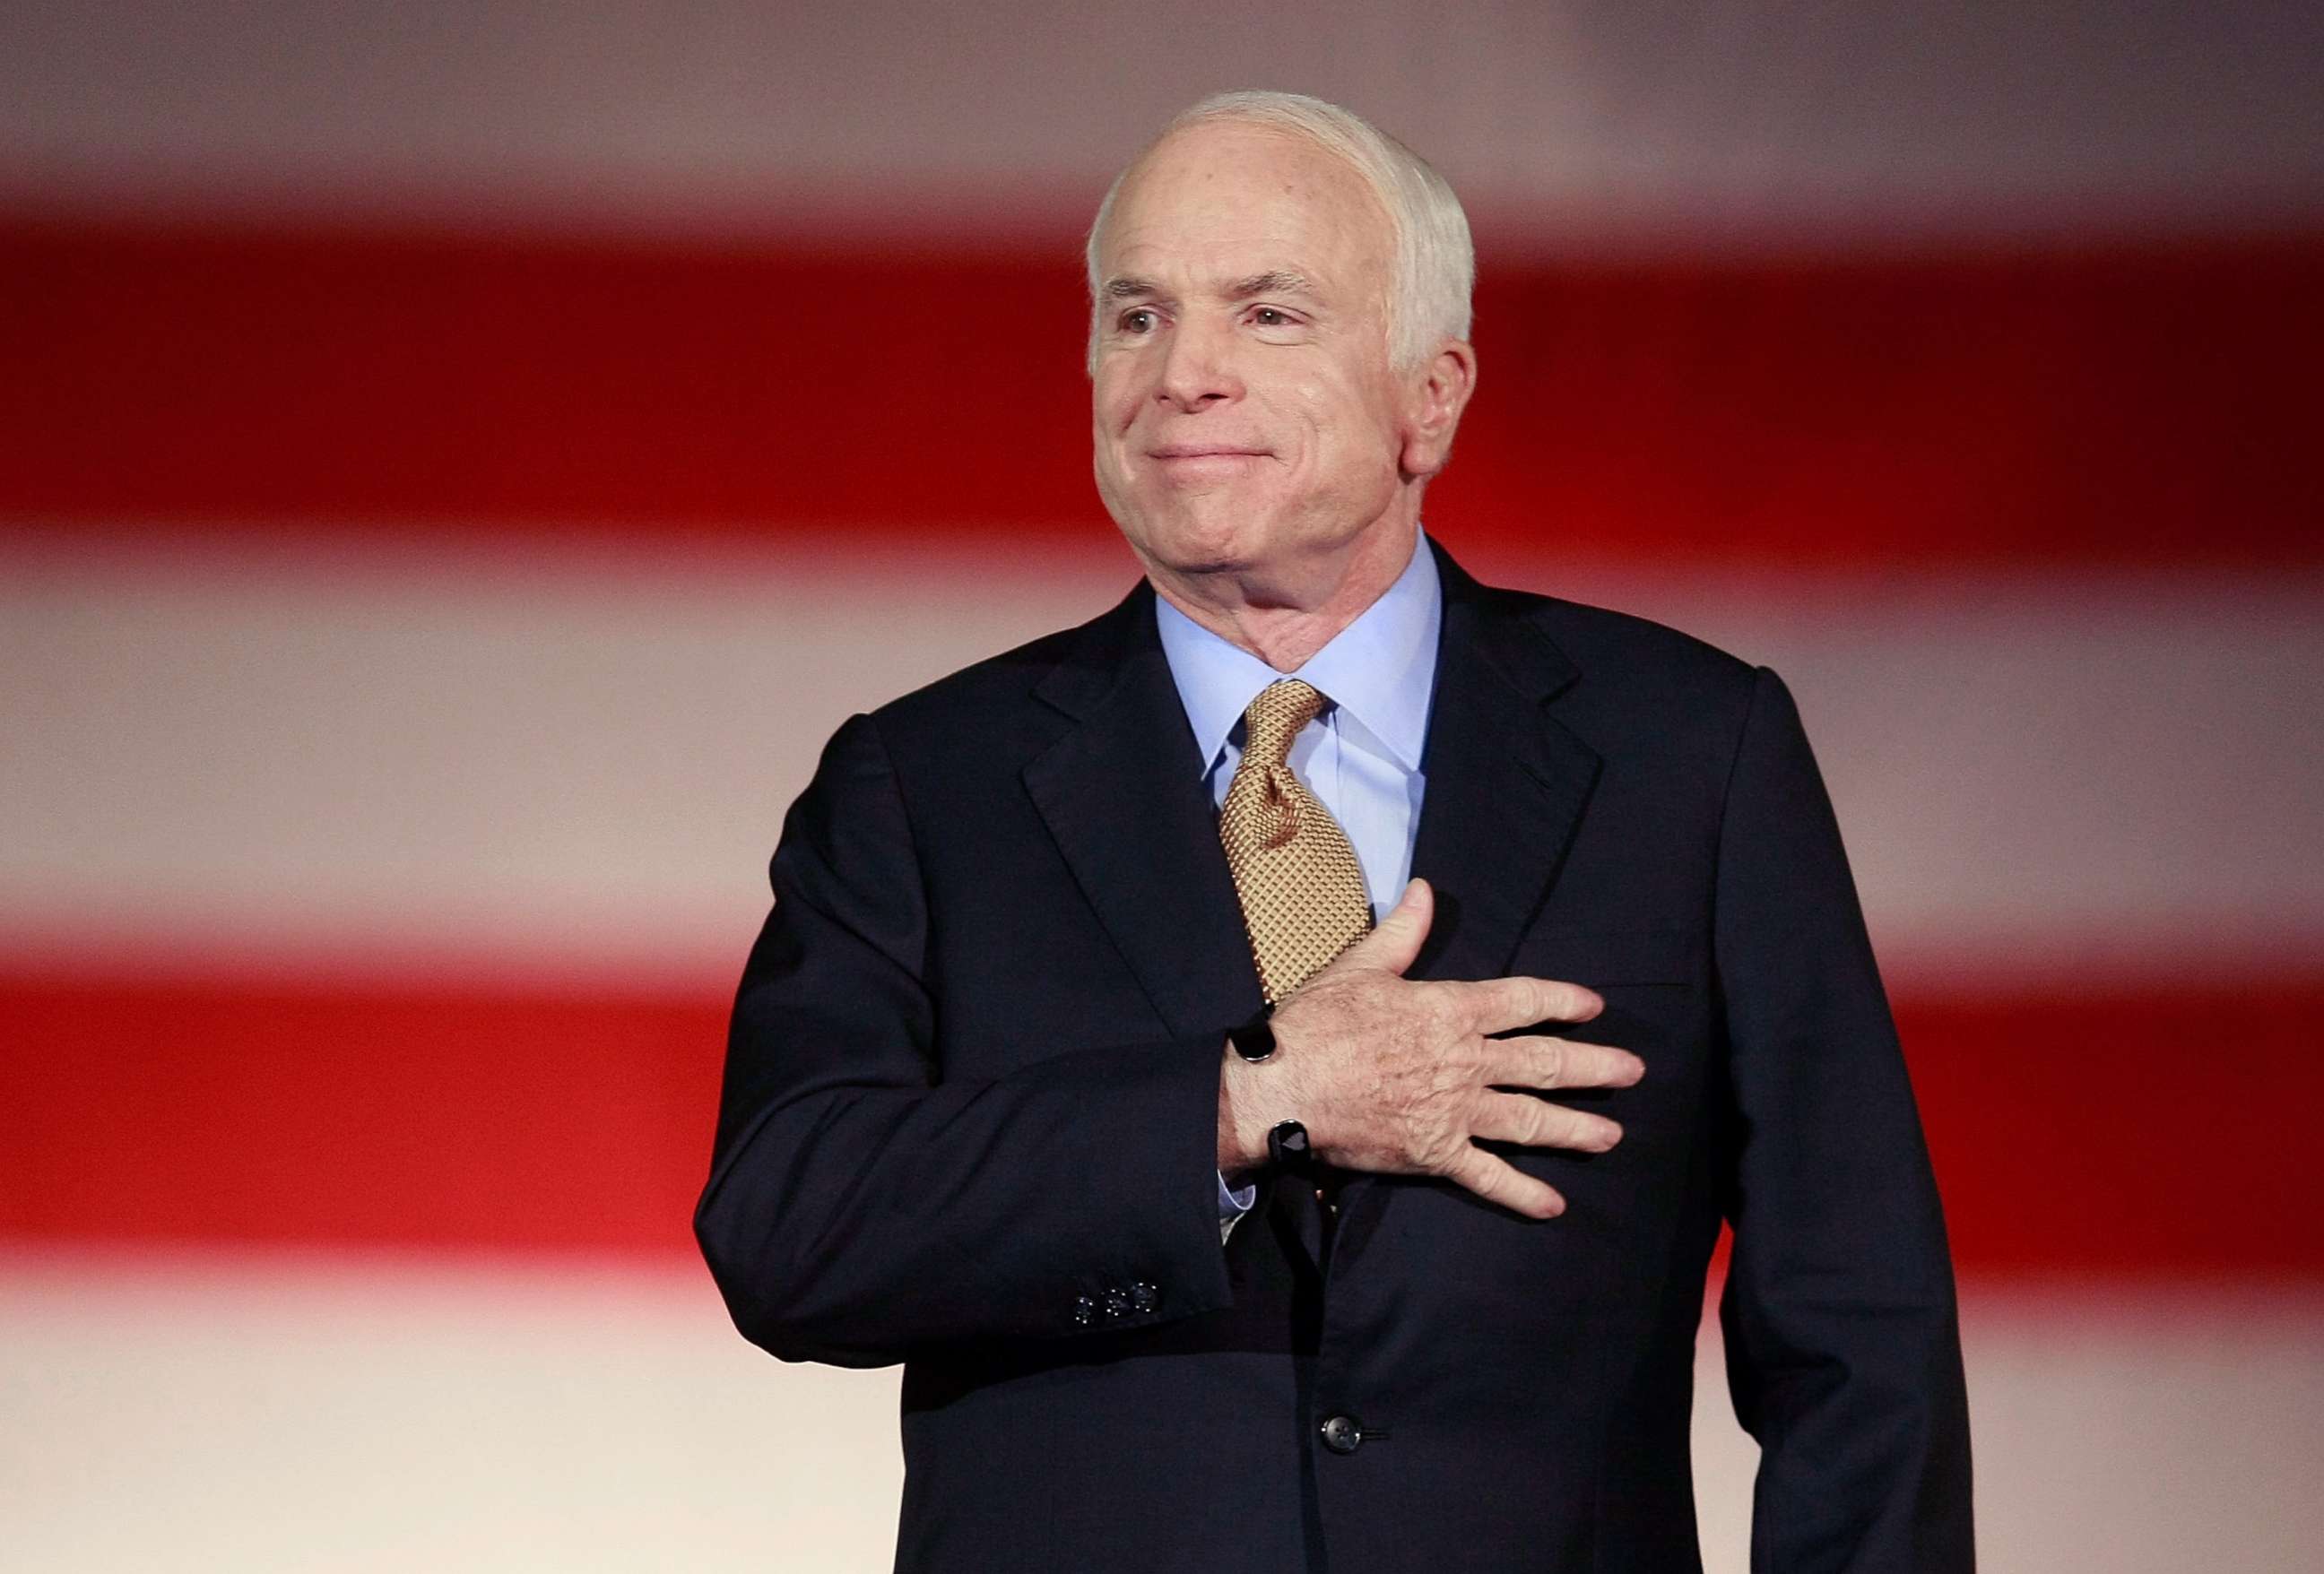 PHOTO: Republican presidential nominee and Sen. John McCain concedes victory on stage during the election night rally, Nov. 4, 2008 in Phoenix, Ariz.